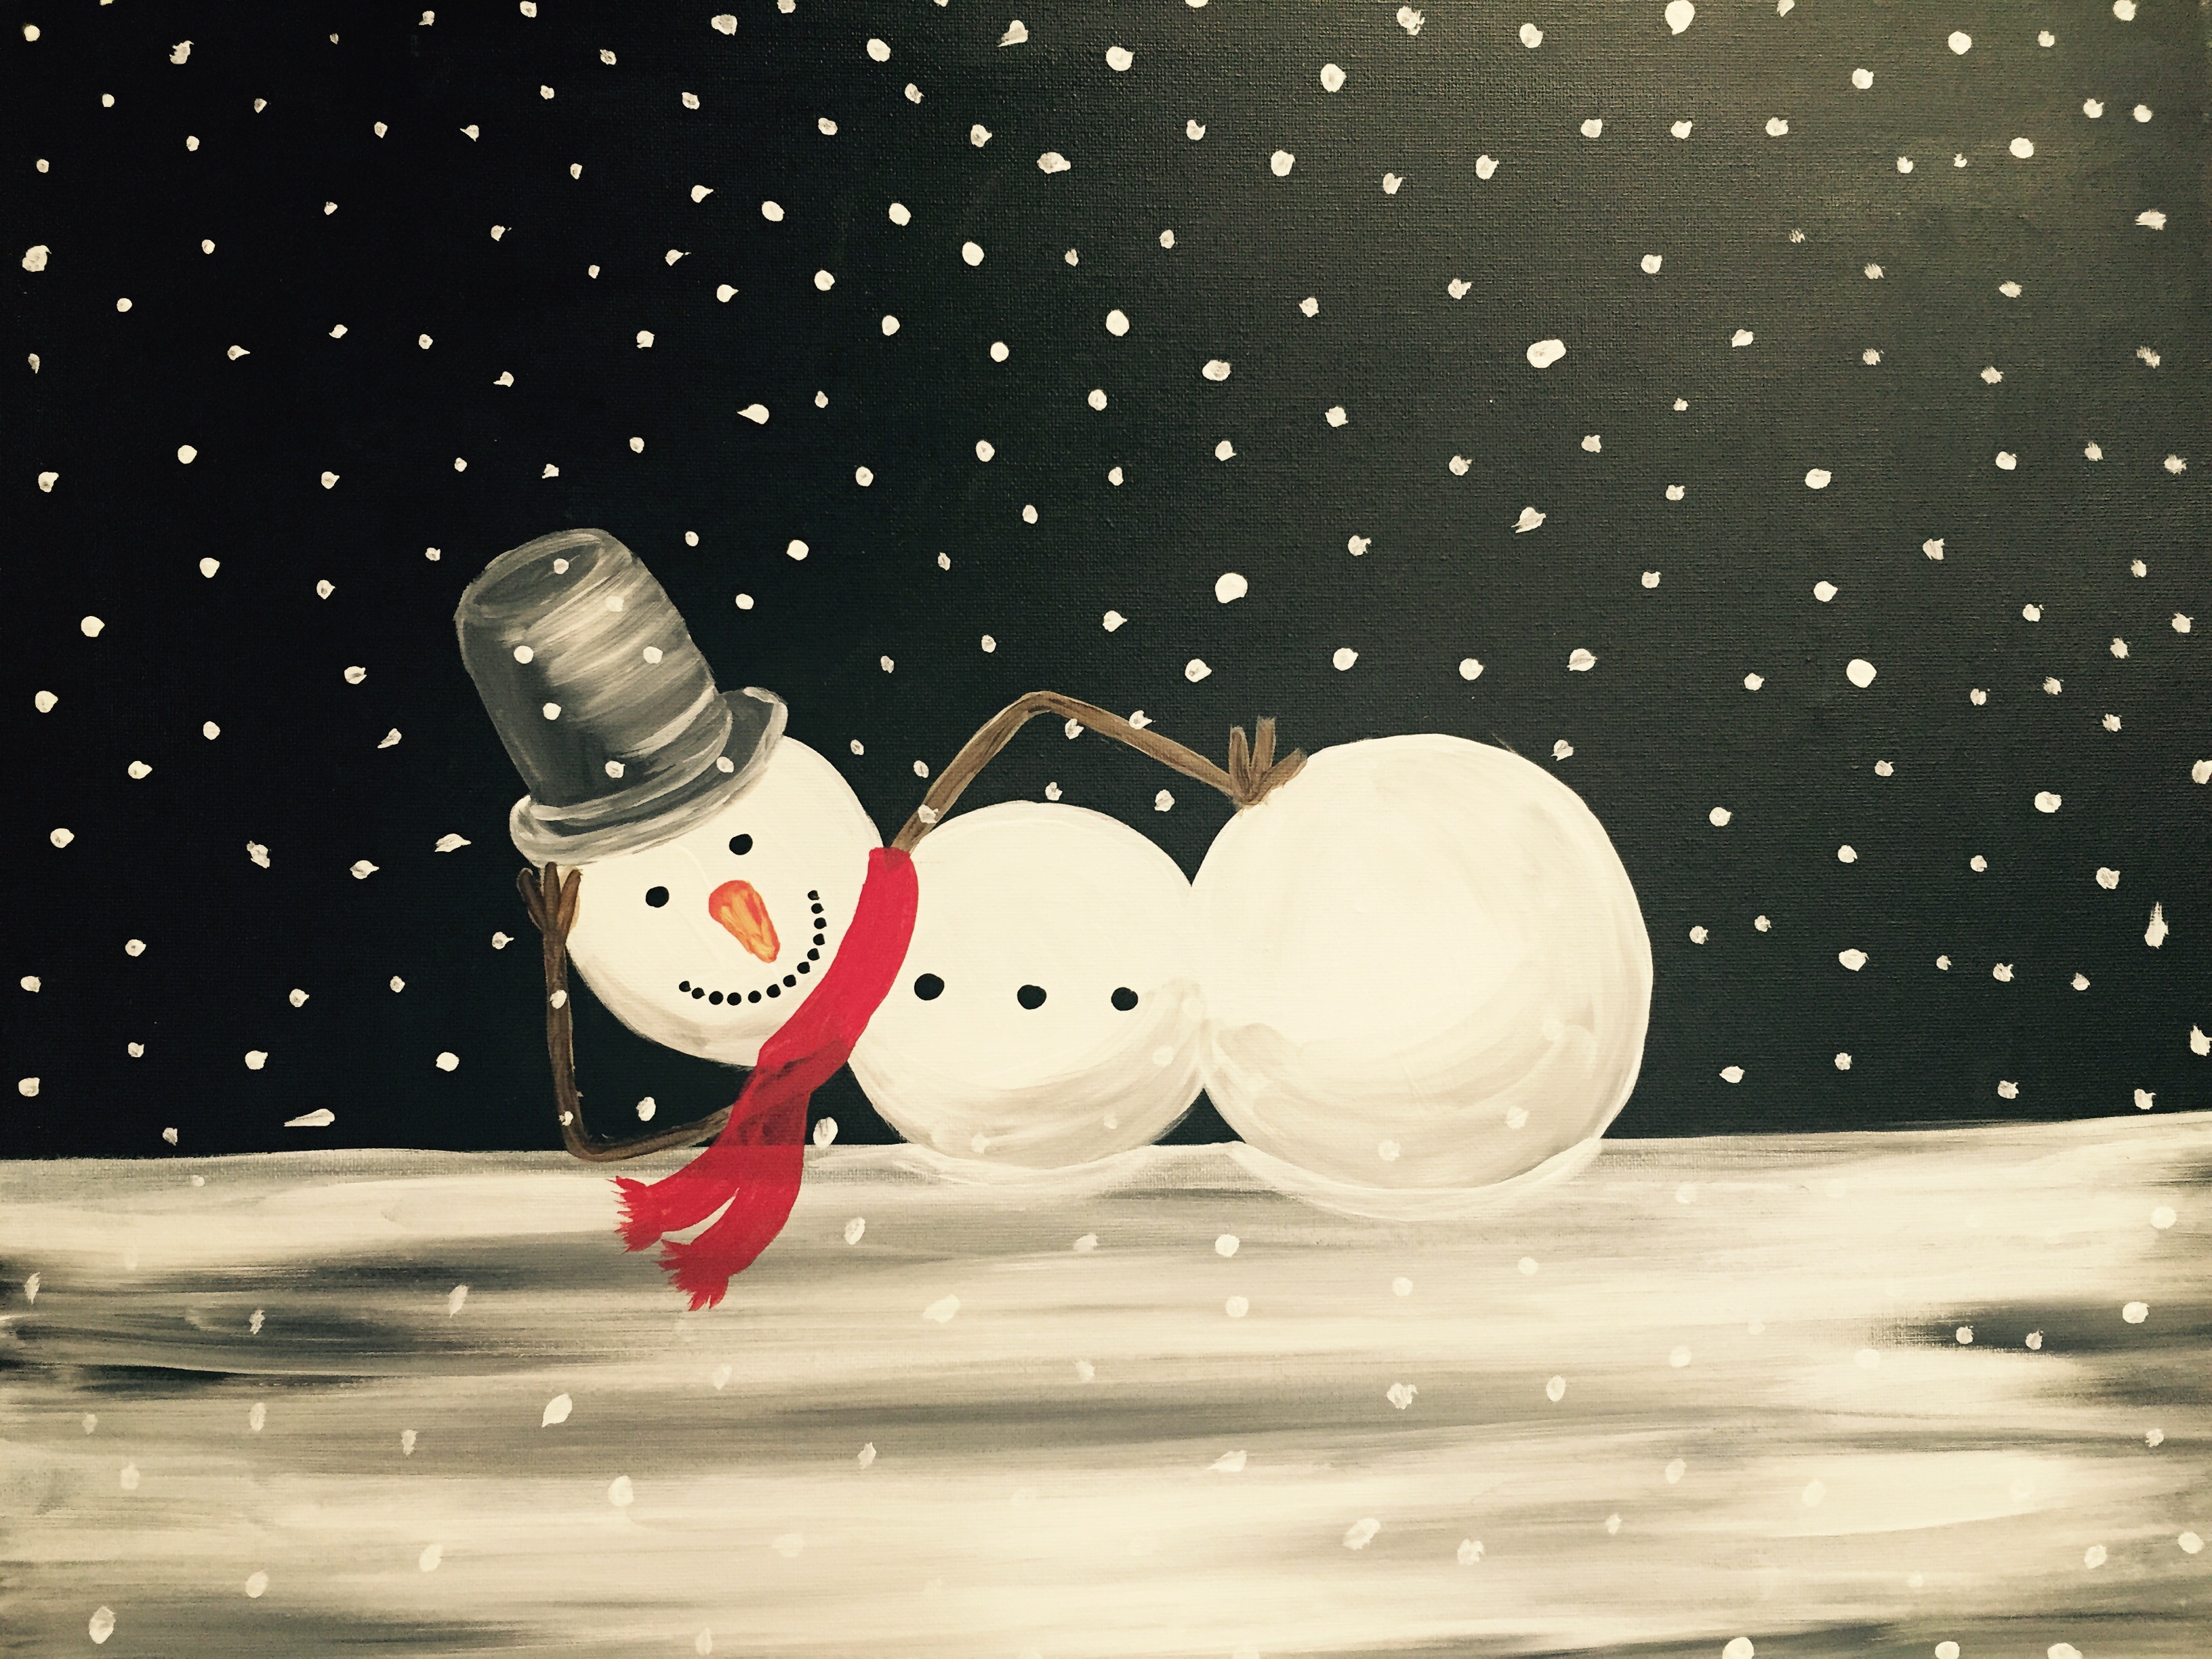 A Just Chillin in the Snow paint nite project by Yaymaker